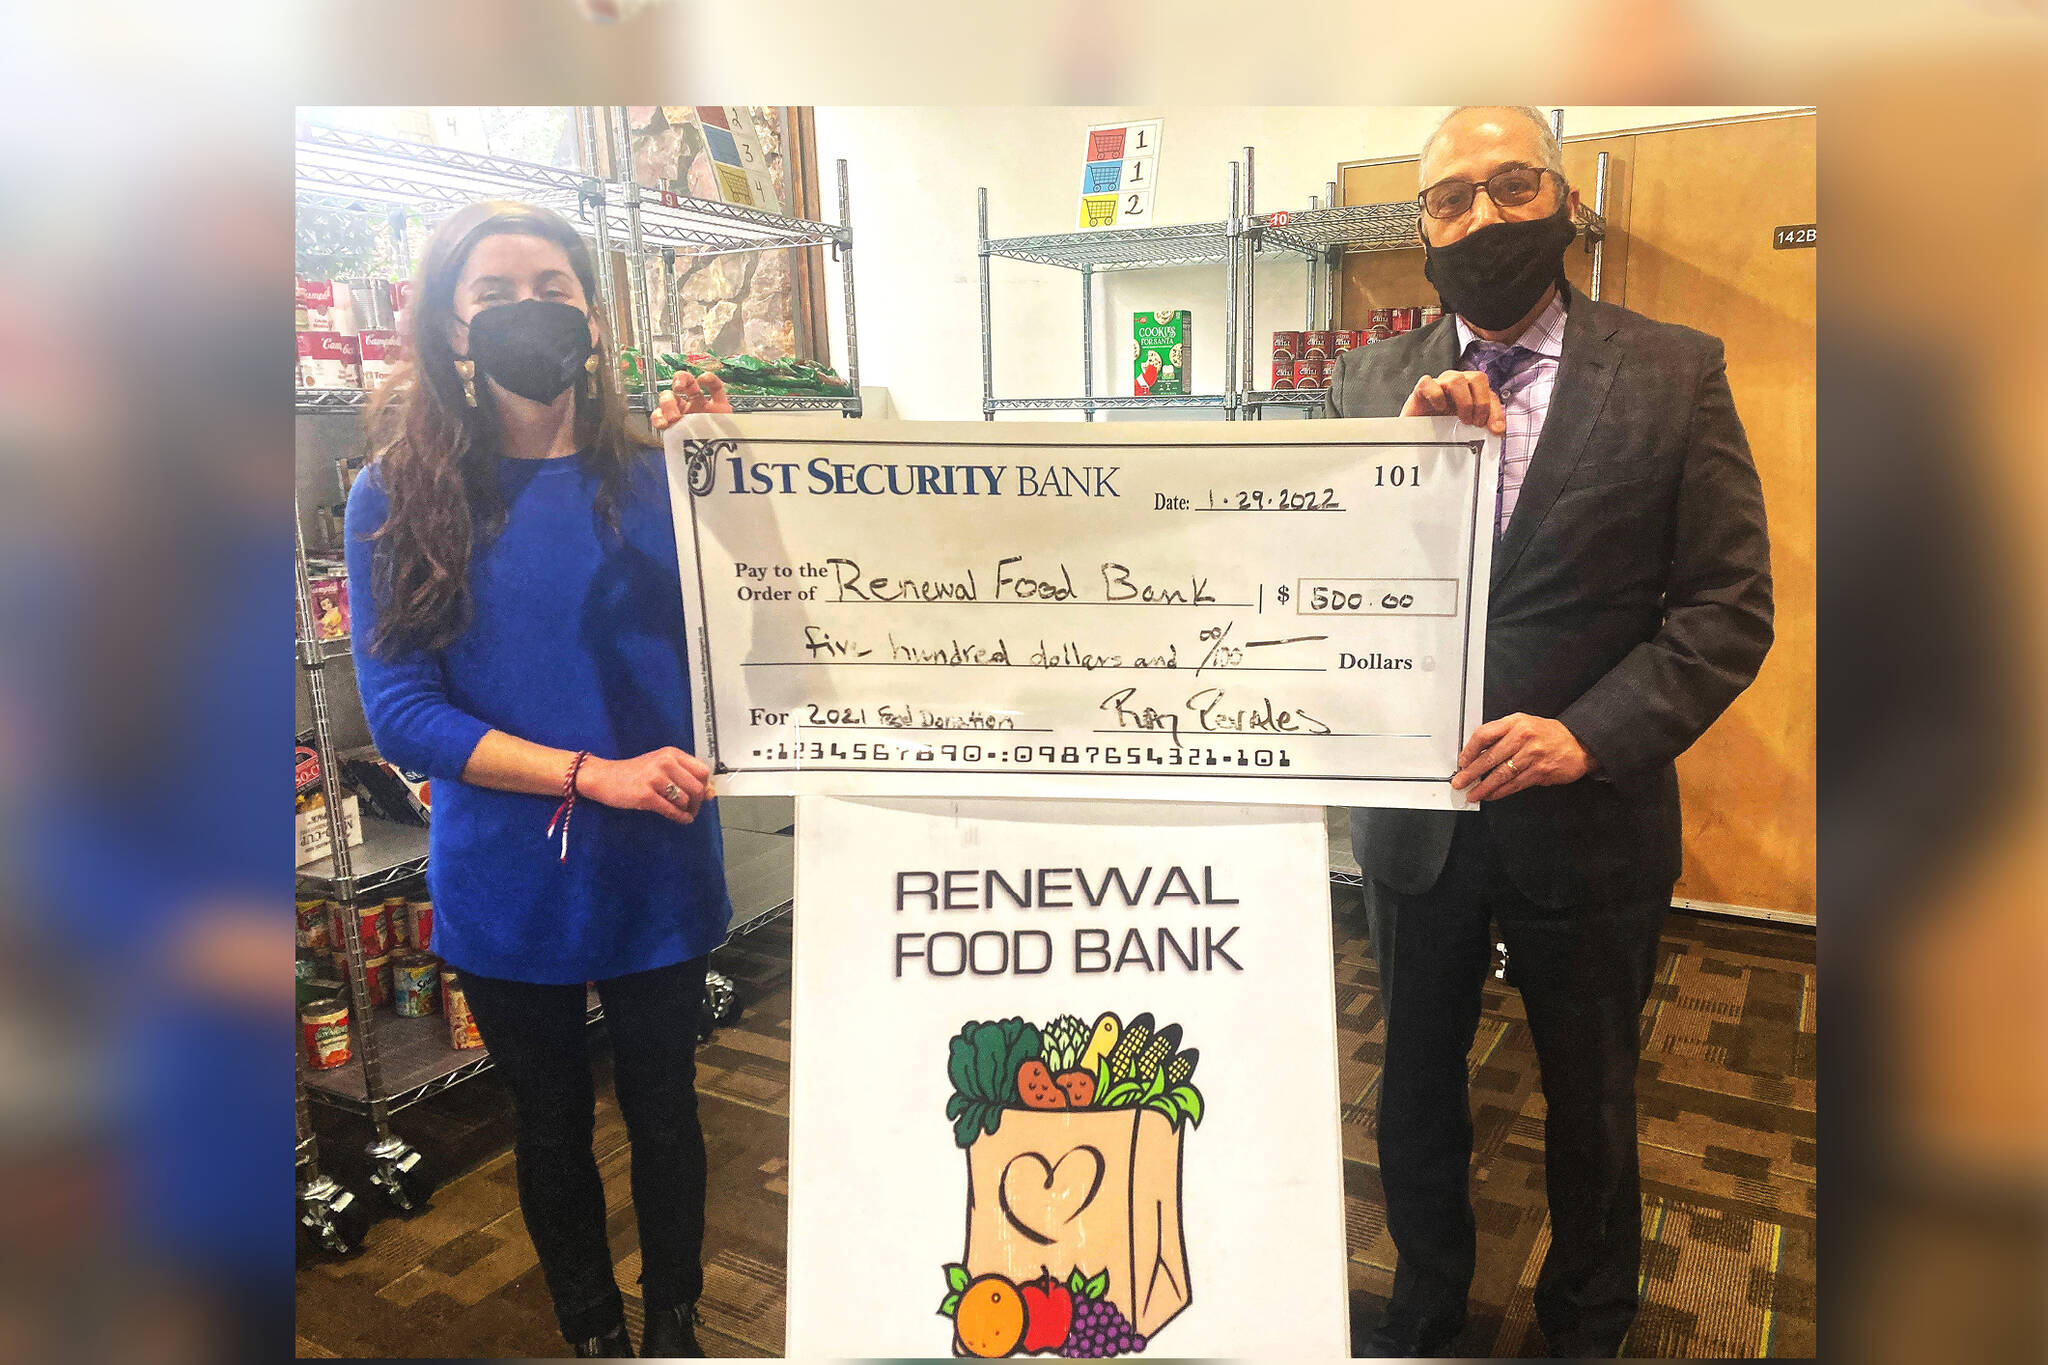 Through volunteerism and and financial support, 1st Security Bank’s Overlake branch regularly gives back to its community, including donating more than $200,000 to food banks in their branch footprint last year, including Redmond’s Renewal Food Bank.